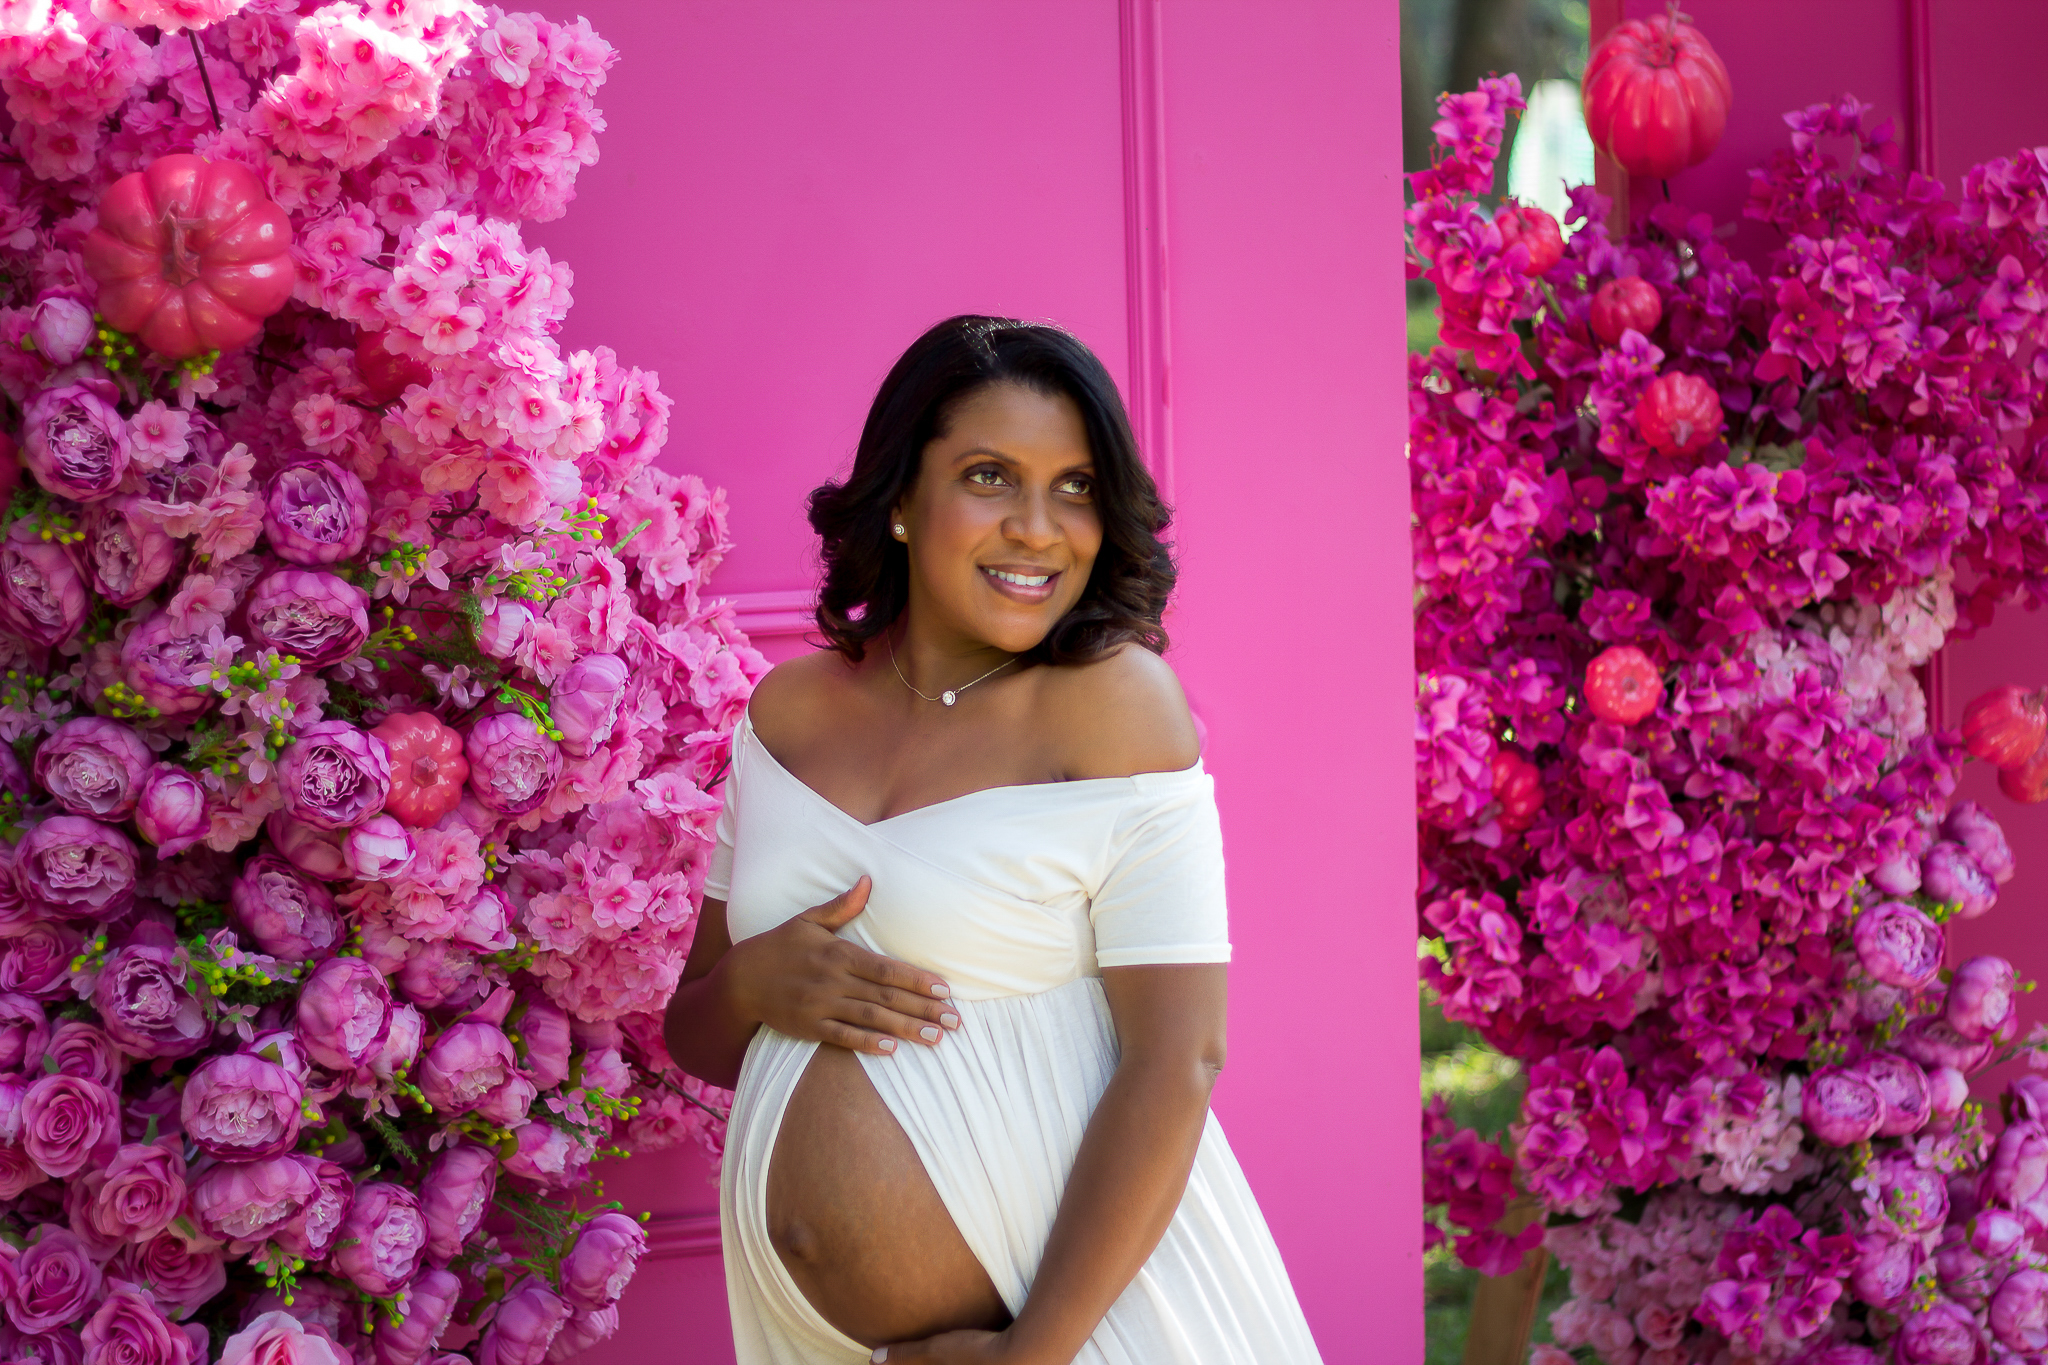 affordable maternity photography NYC, Best maternity photographer NYC, Brooklyn maternity photographer, Maternity photoshoot (14)